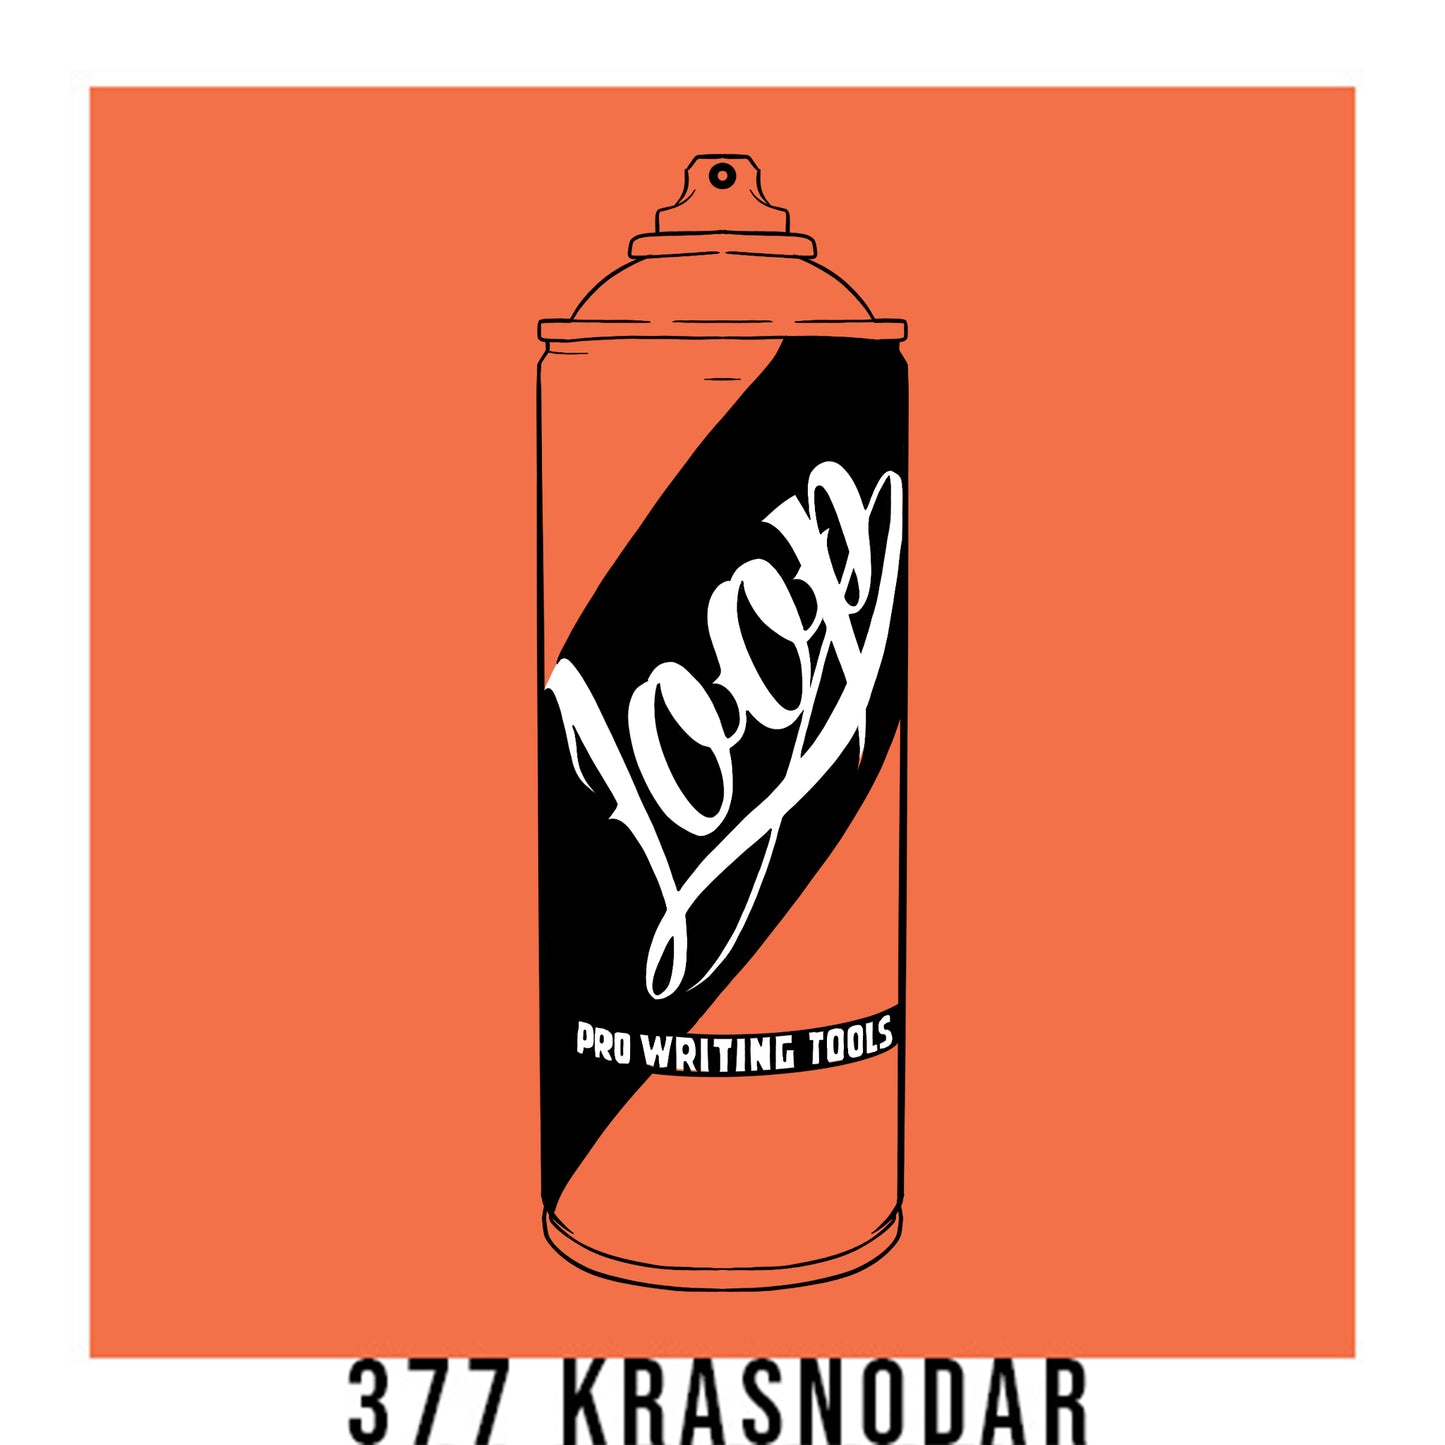 A black outline drawing of a pastel orange spray paint can with the word "Loop" written on the face in script. The background is a color swatch of the same pastel orange with a white border with the words "377 Krasnodar" at the bottom.